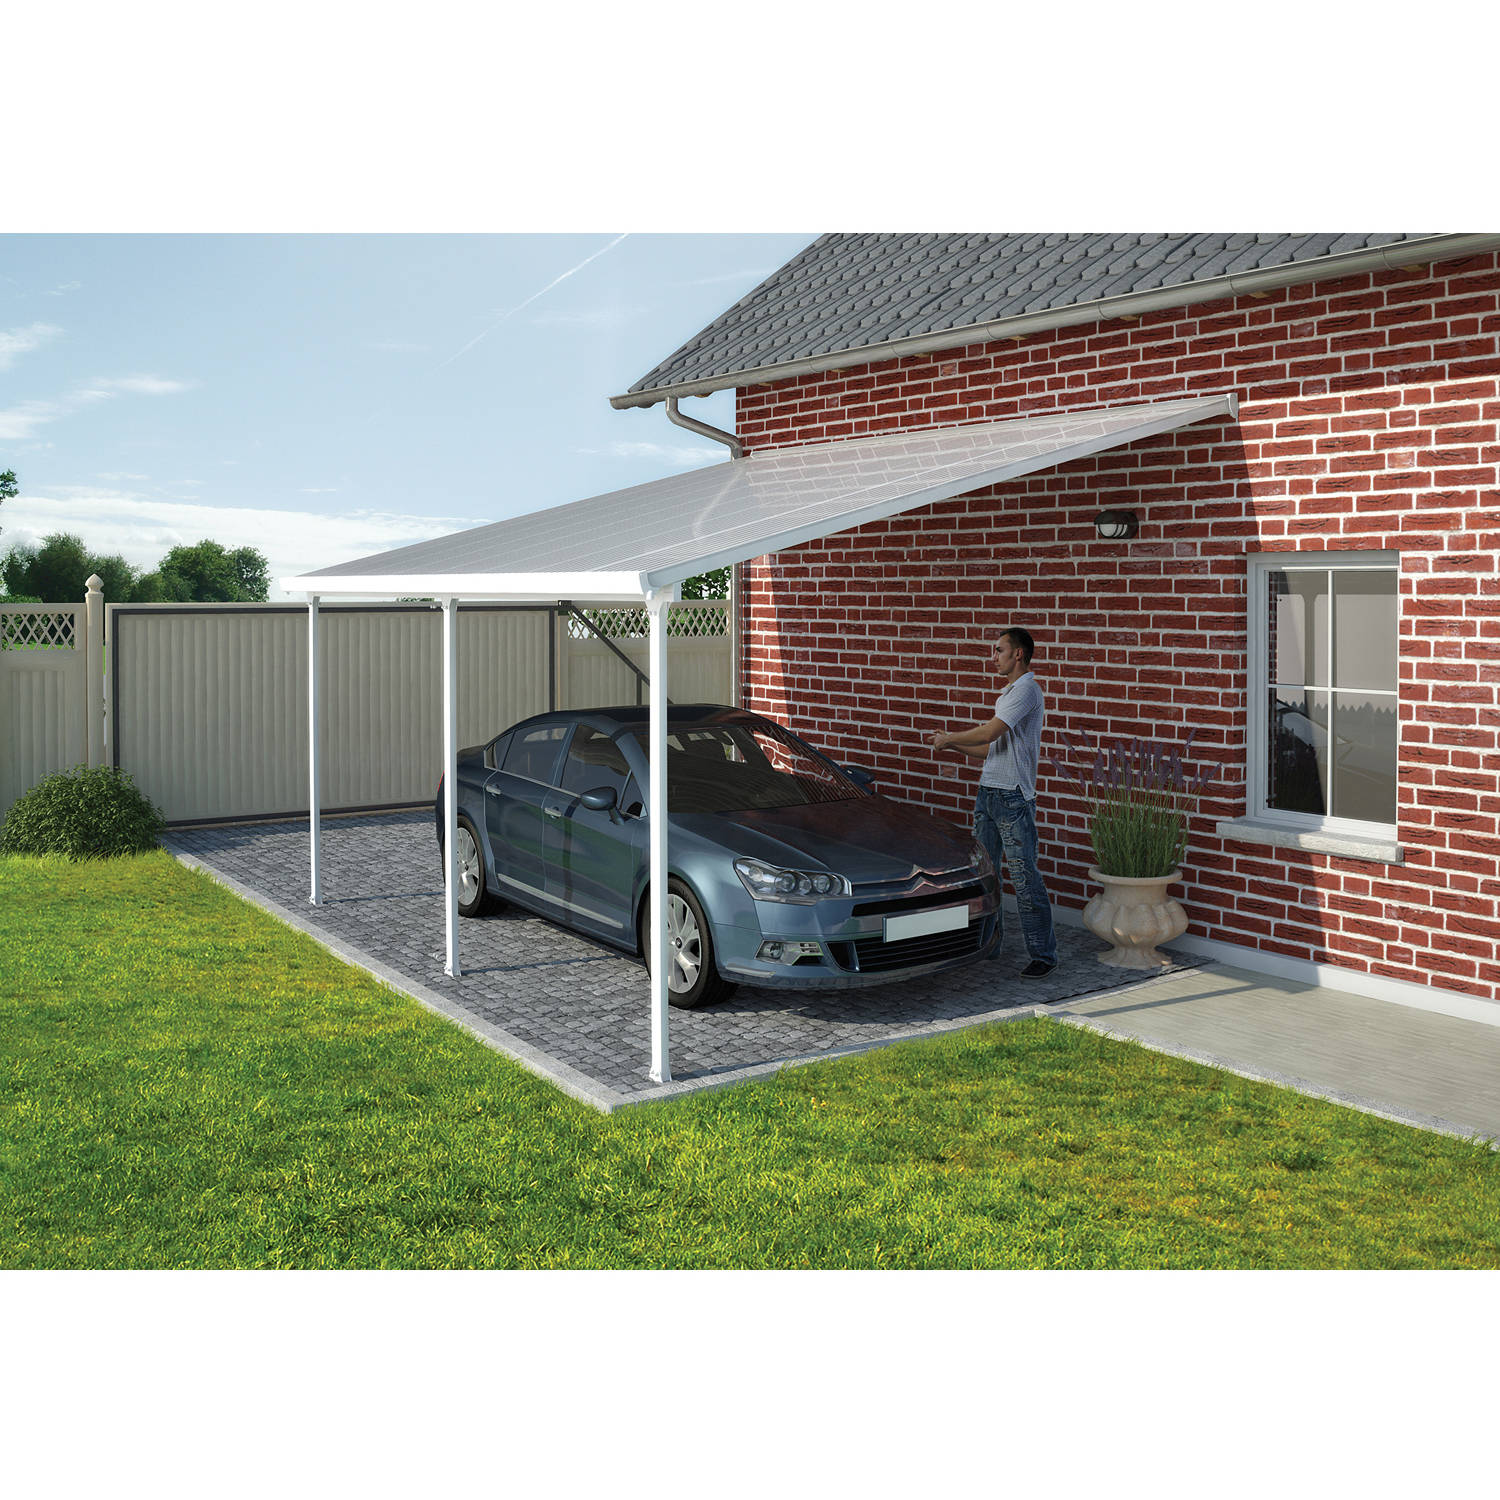 Palram - Canopia Feria 13' x 26' Polycarbonate/Galvanized Steel Patio Cover - White/Clear - image 3 of 9